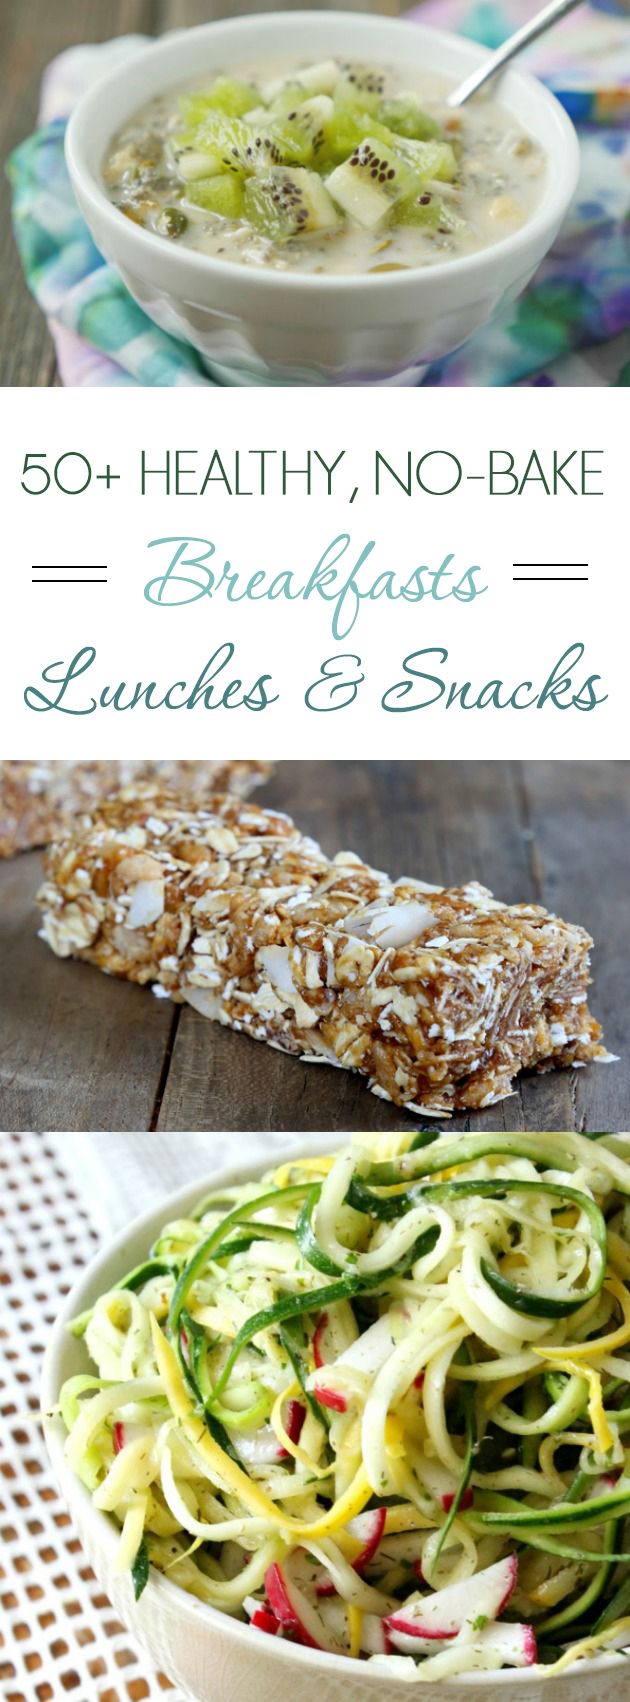 50+ Healthy, No-Bake Breakfasts, Lunches, and Snacks // deliciousobsessions.com